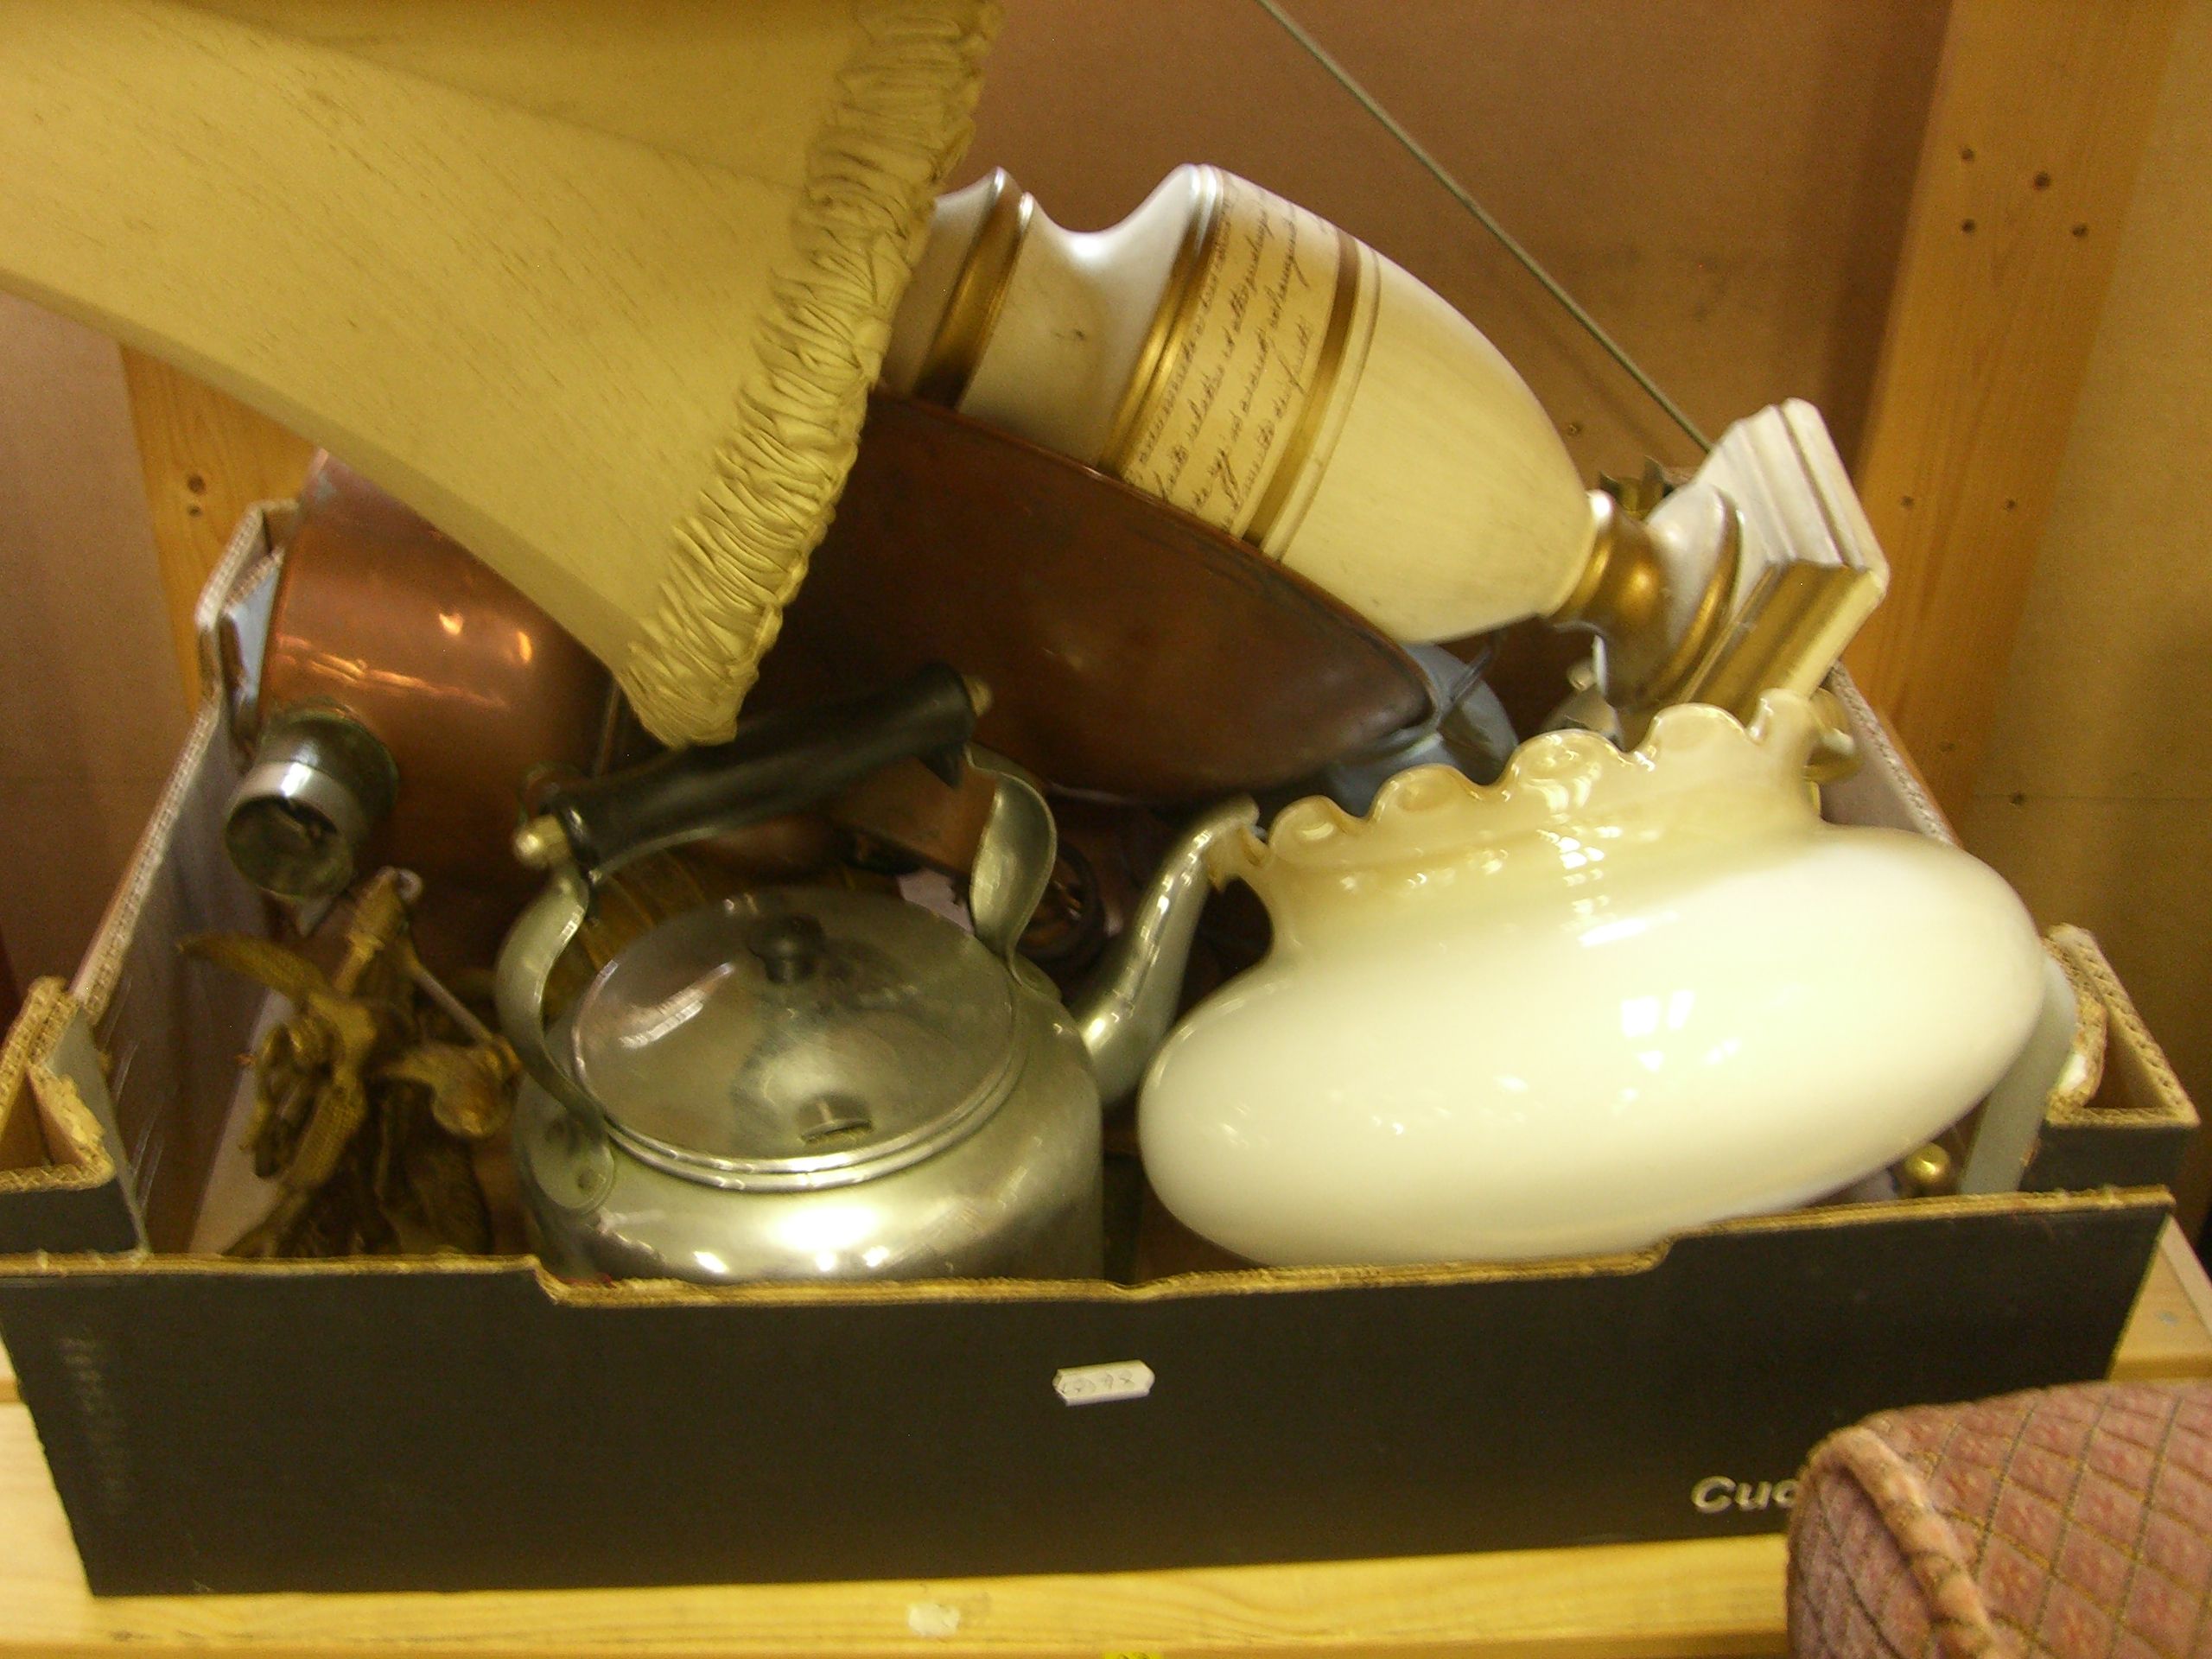 Two copper samovars, an antique copper hunting horn,a chandelier and candlesticks. and a box of - Image 2 of 2